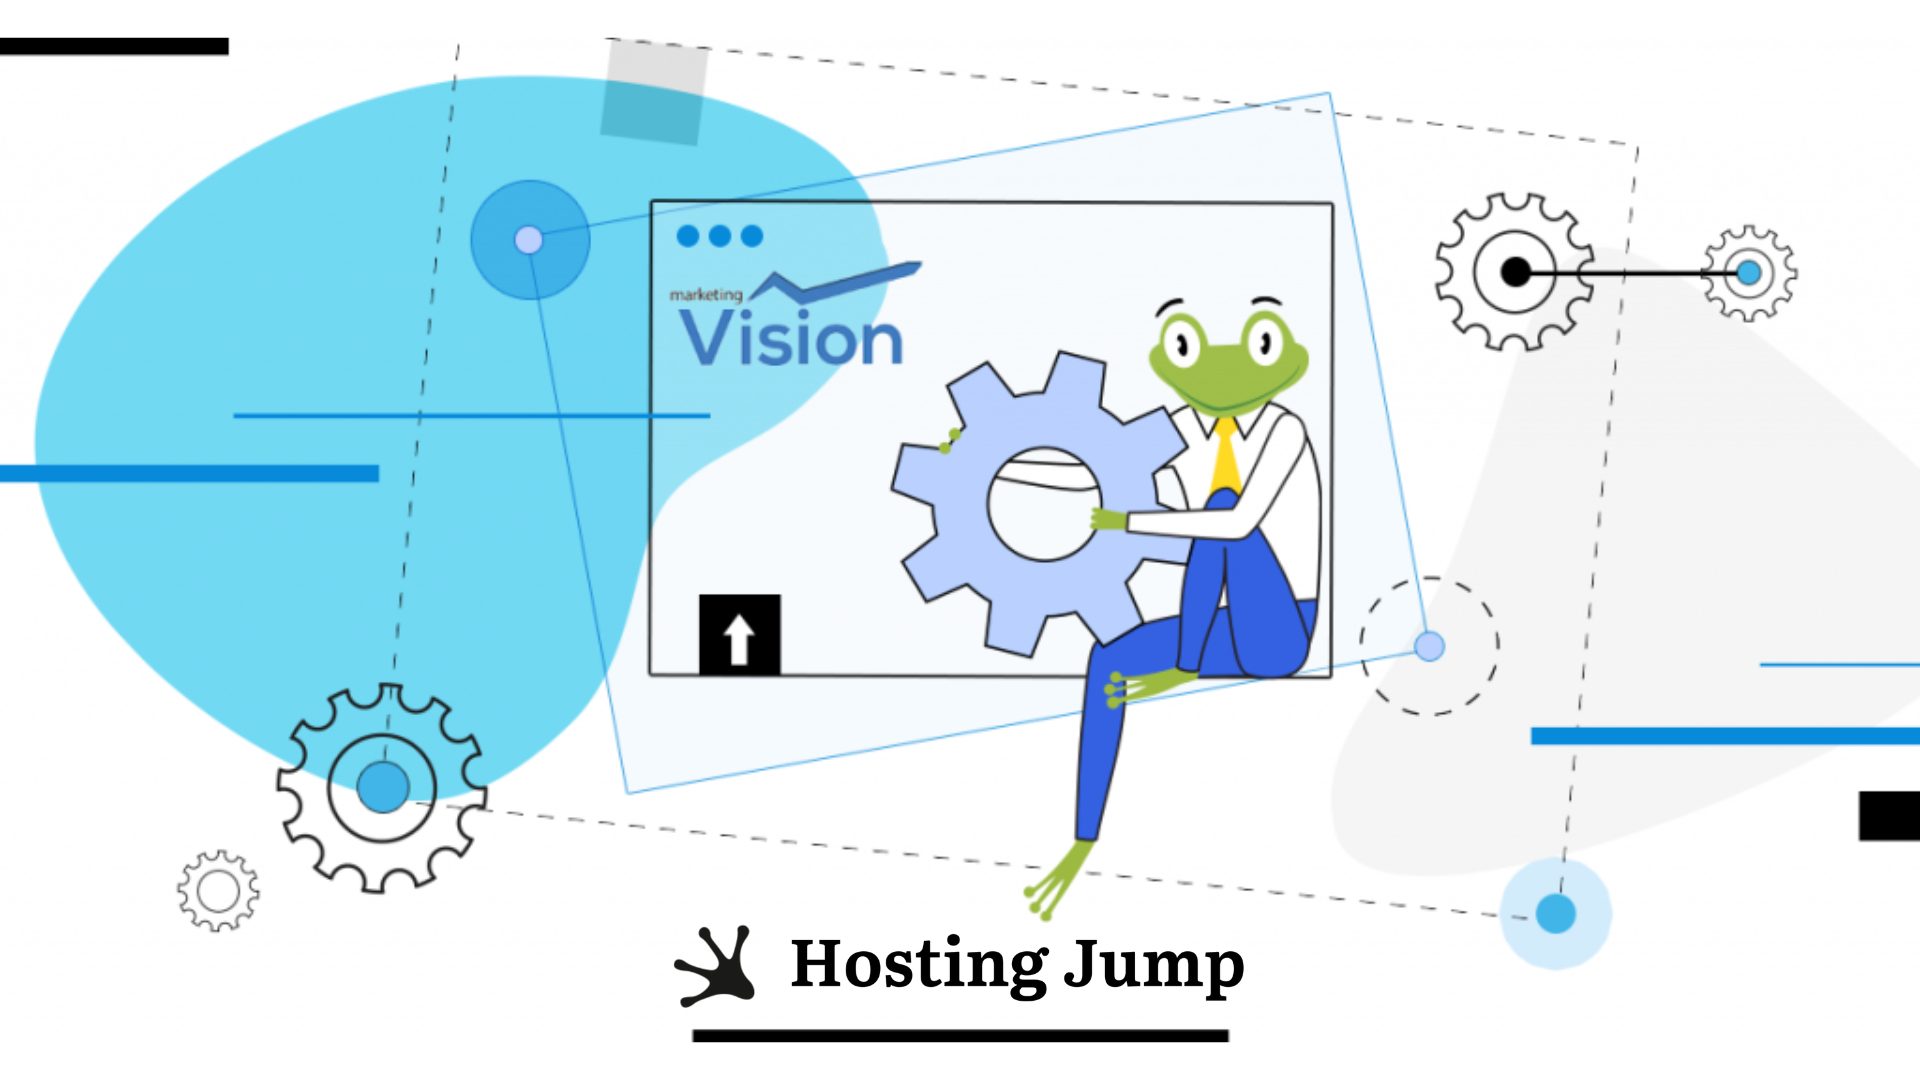 Case Study: How Marketing Vision Wins With Hosting Jump